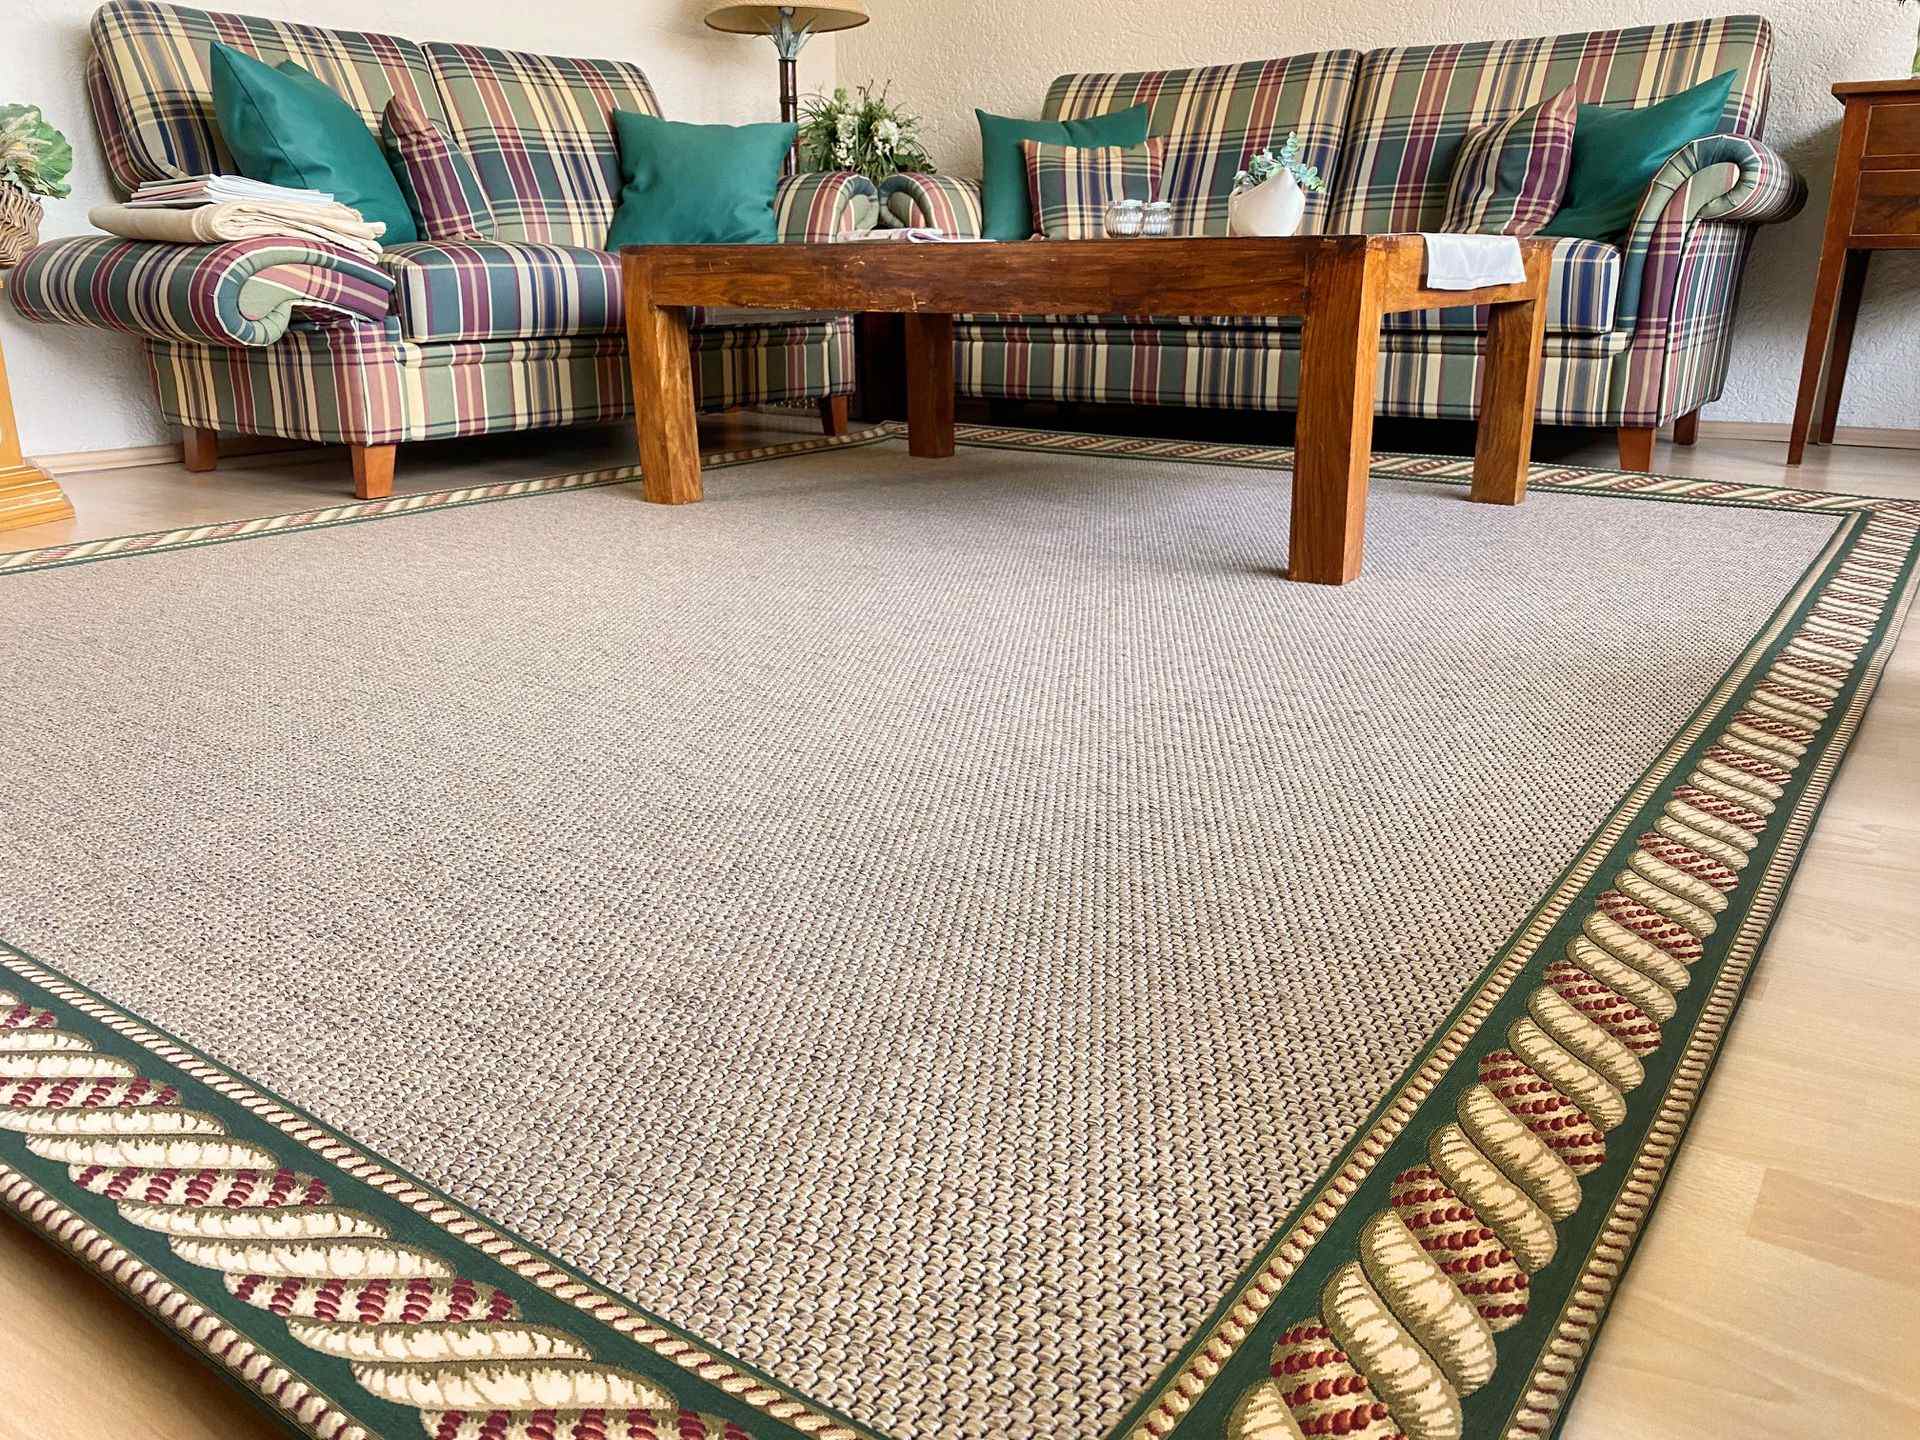 Photo of an easy to clean synthetic rug with an intricately woven jacquard-woven border with a rope pattern.